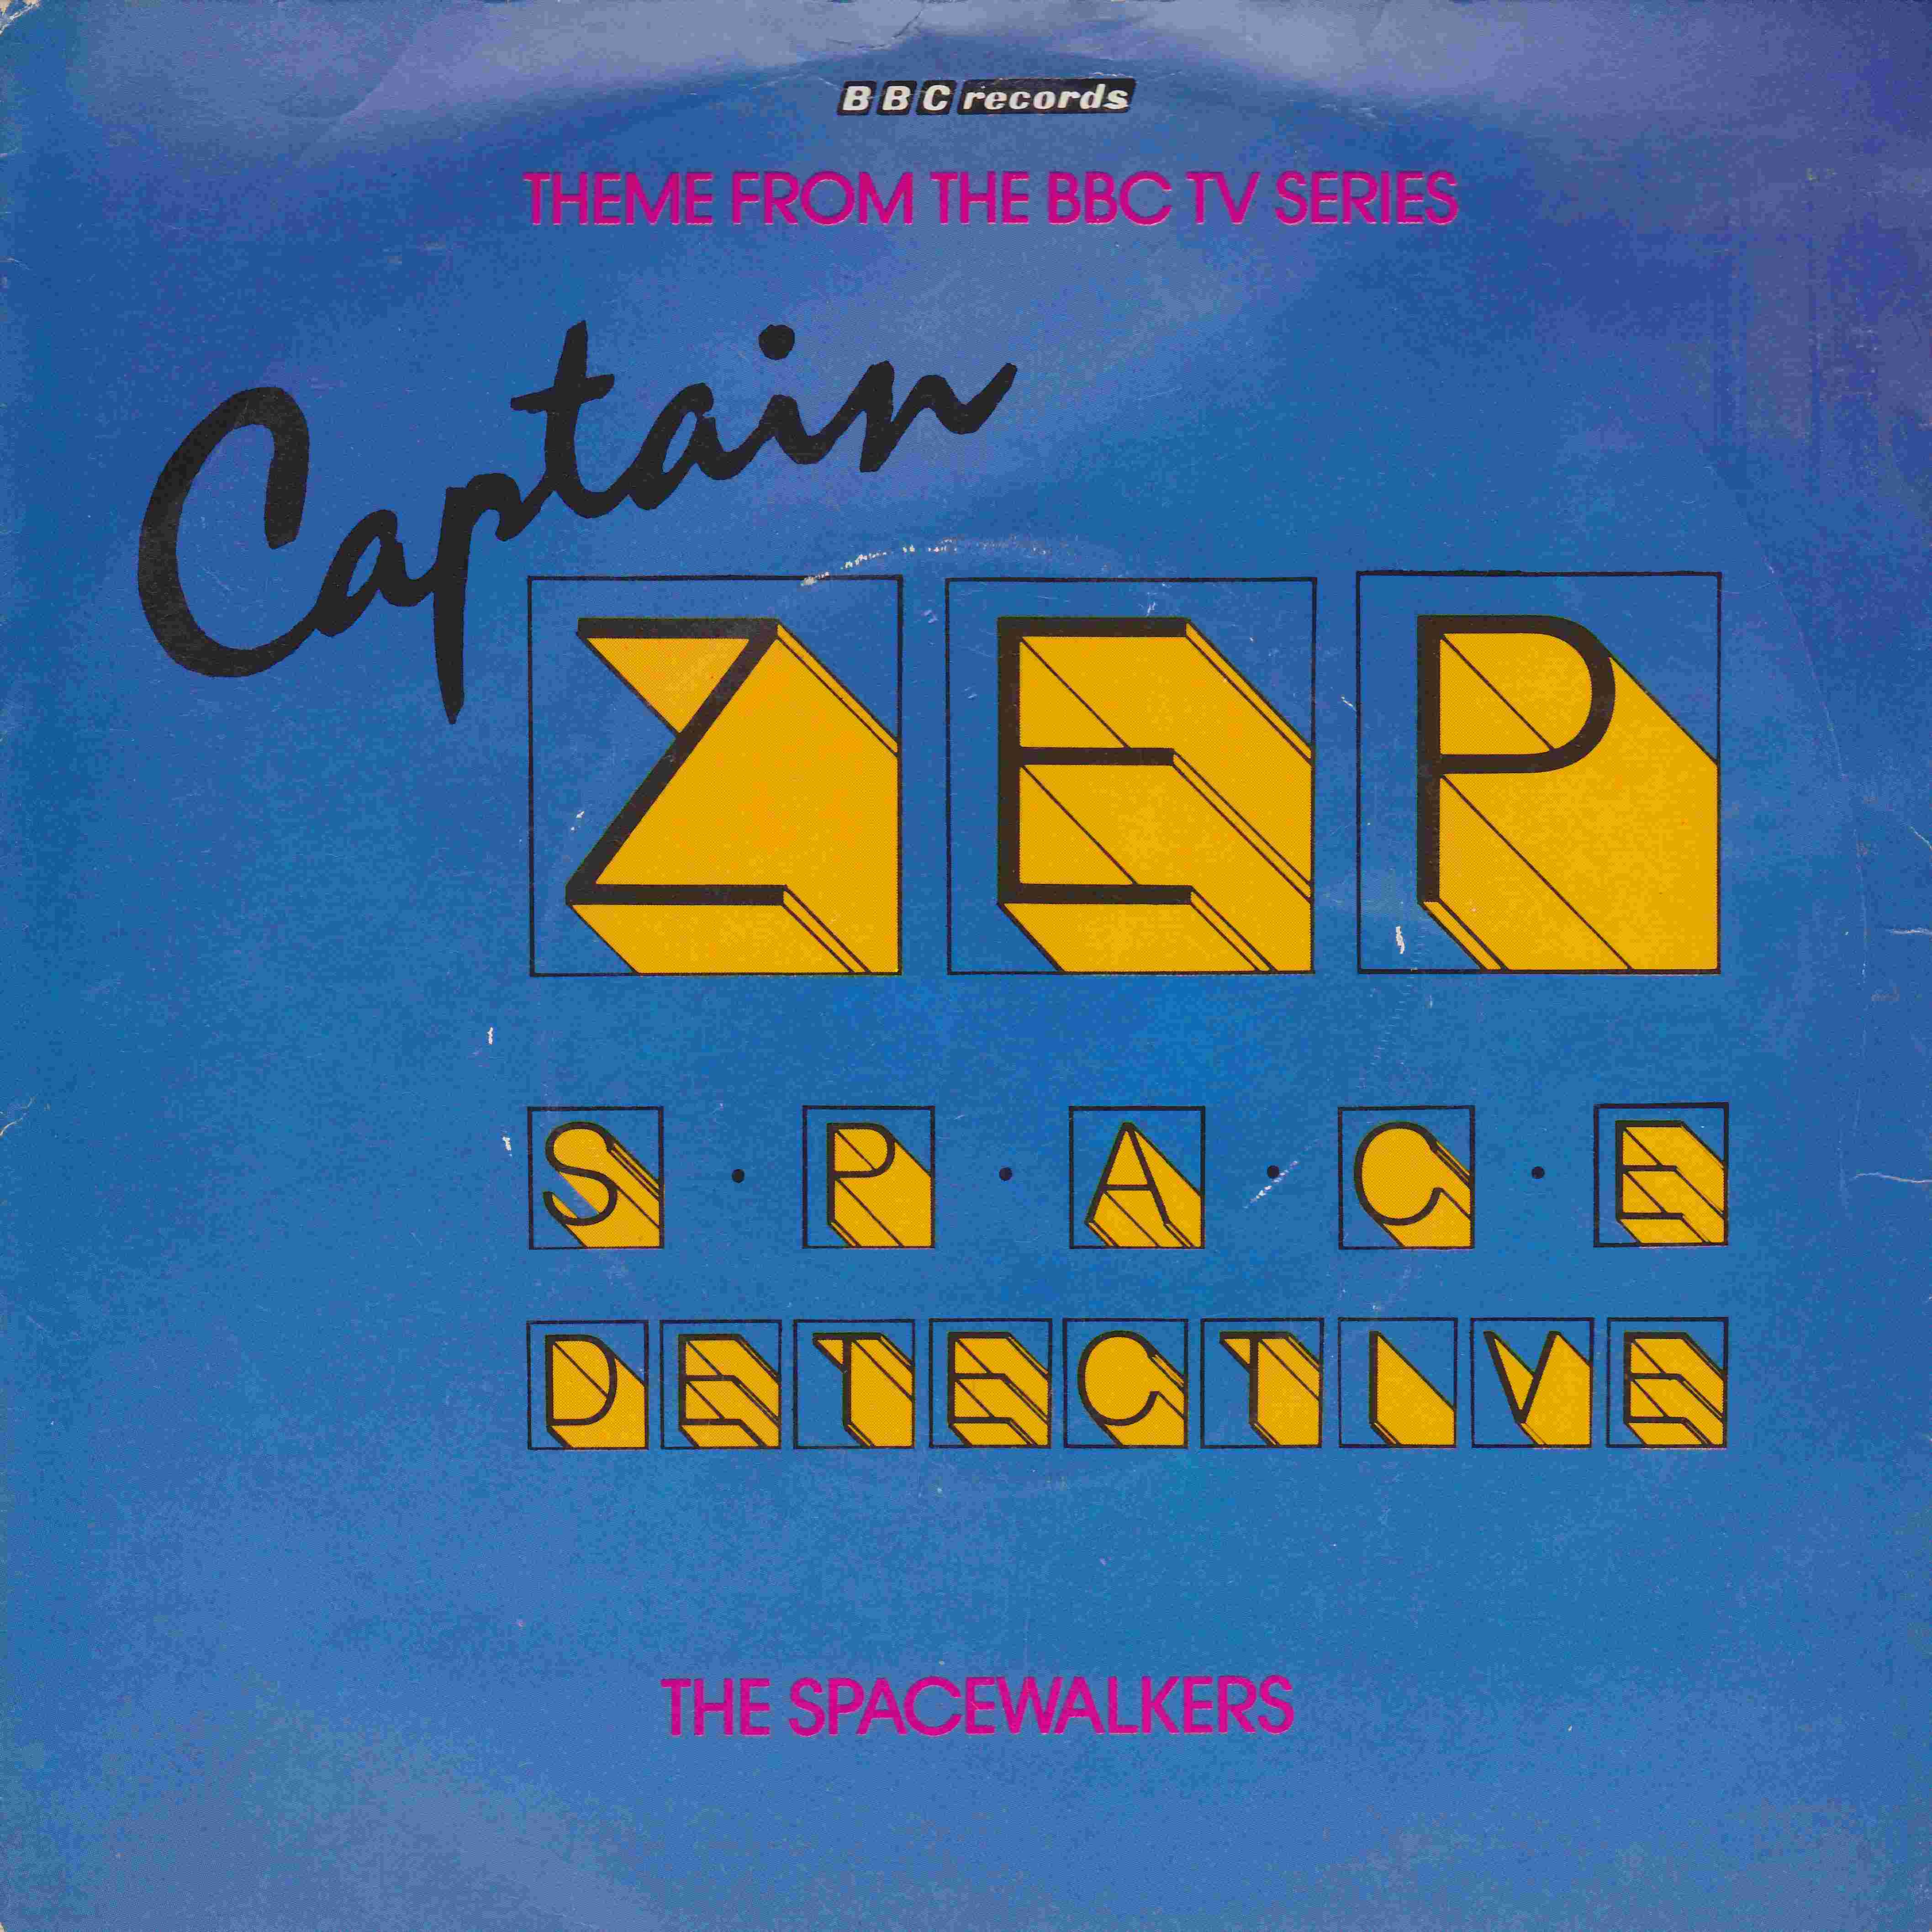 Picture of RESL 127 Captain Zep by artist Smith / Aitken from the BBC records and Tapes library